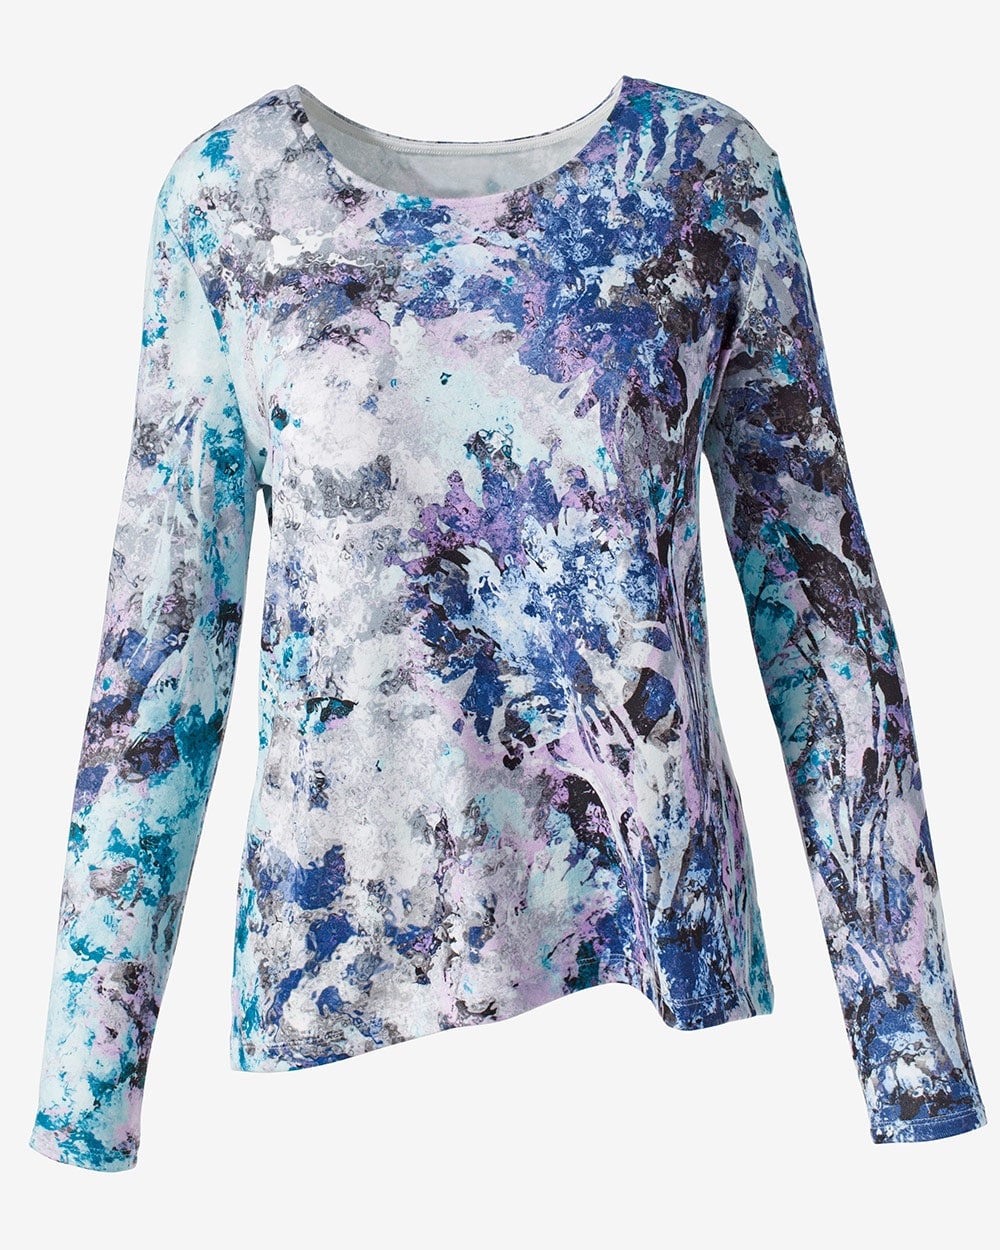 Weekends CoziSoft Floral Confetti Scoop-Neck Top